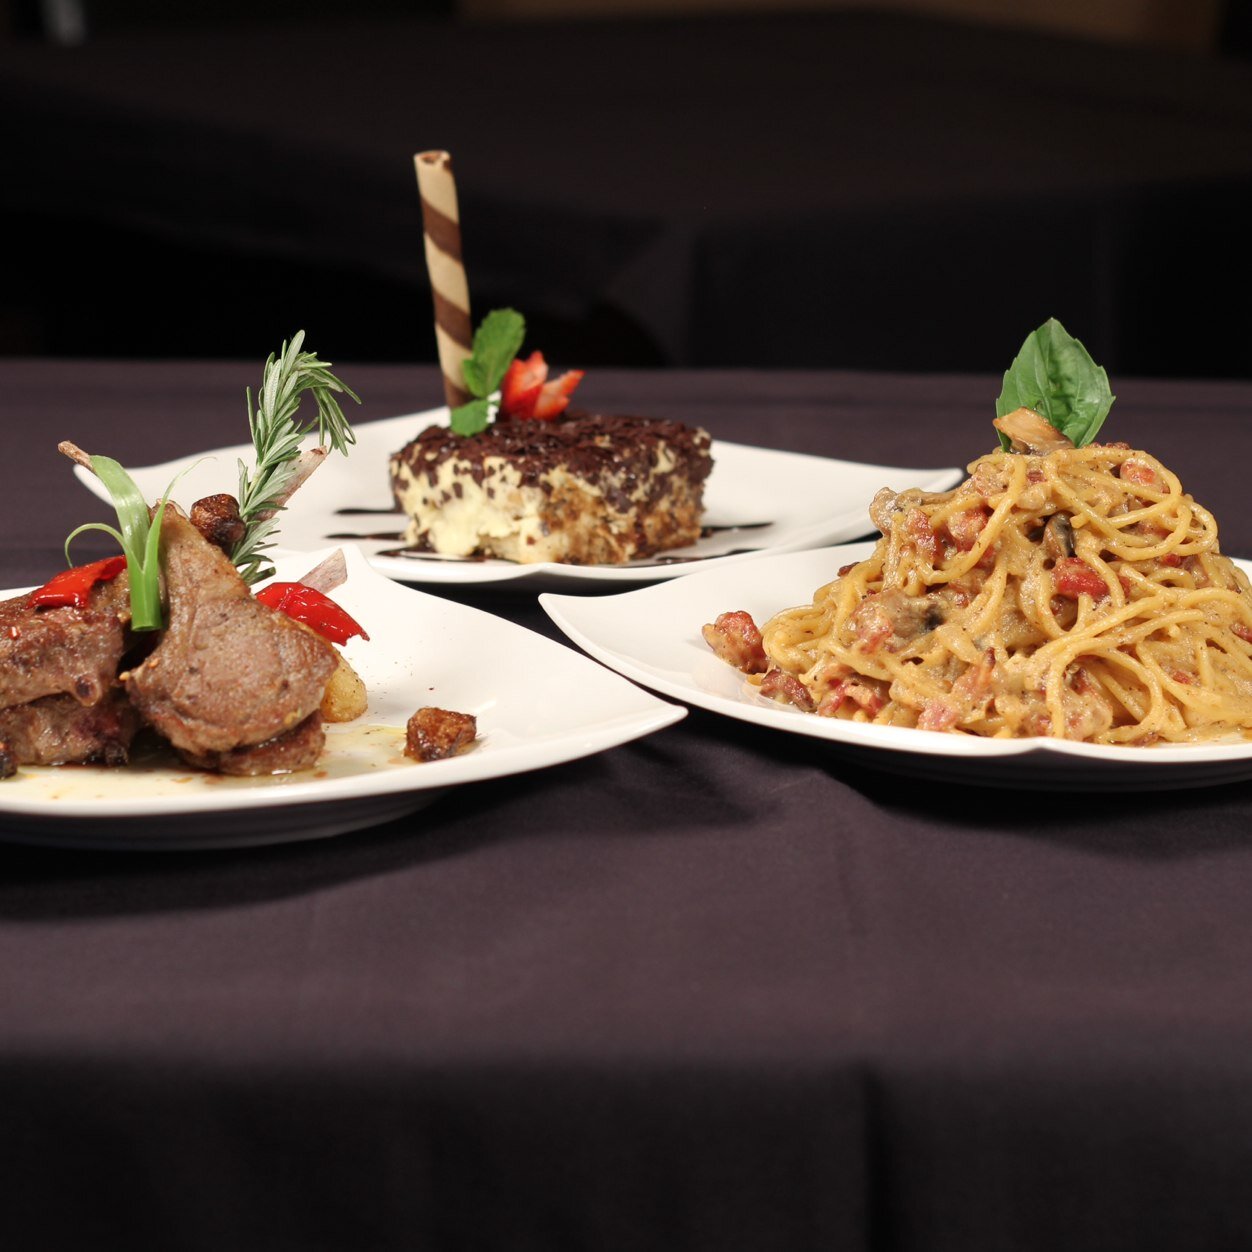 ITALIAN COMFORT FOOD IN A CASUAL FINE DINING MOOD LOCATED IN THE HEART OF EDMONTON'S NEW ARENA DISTRICT!